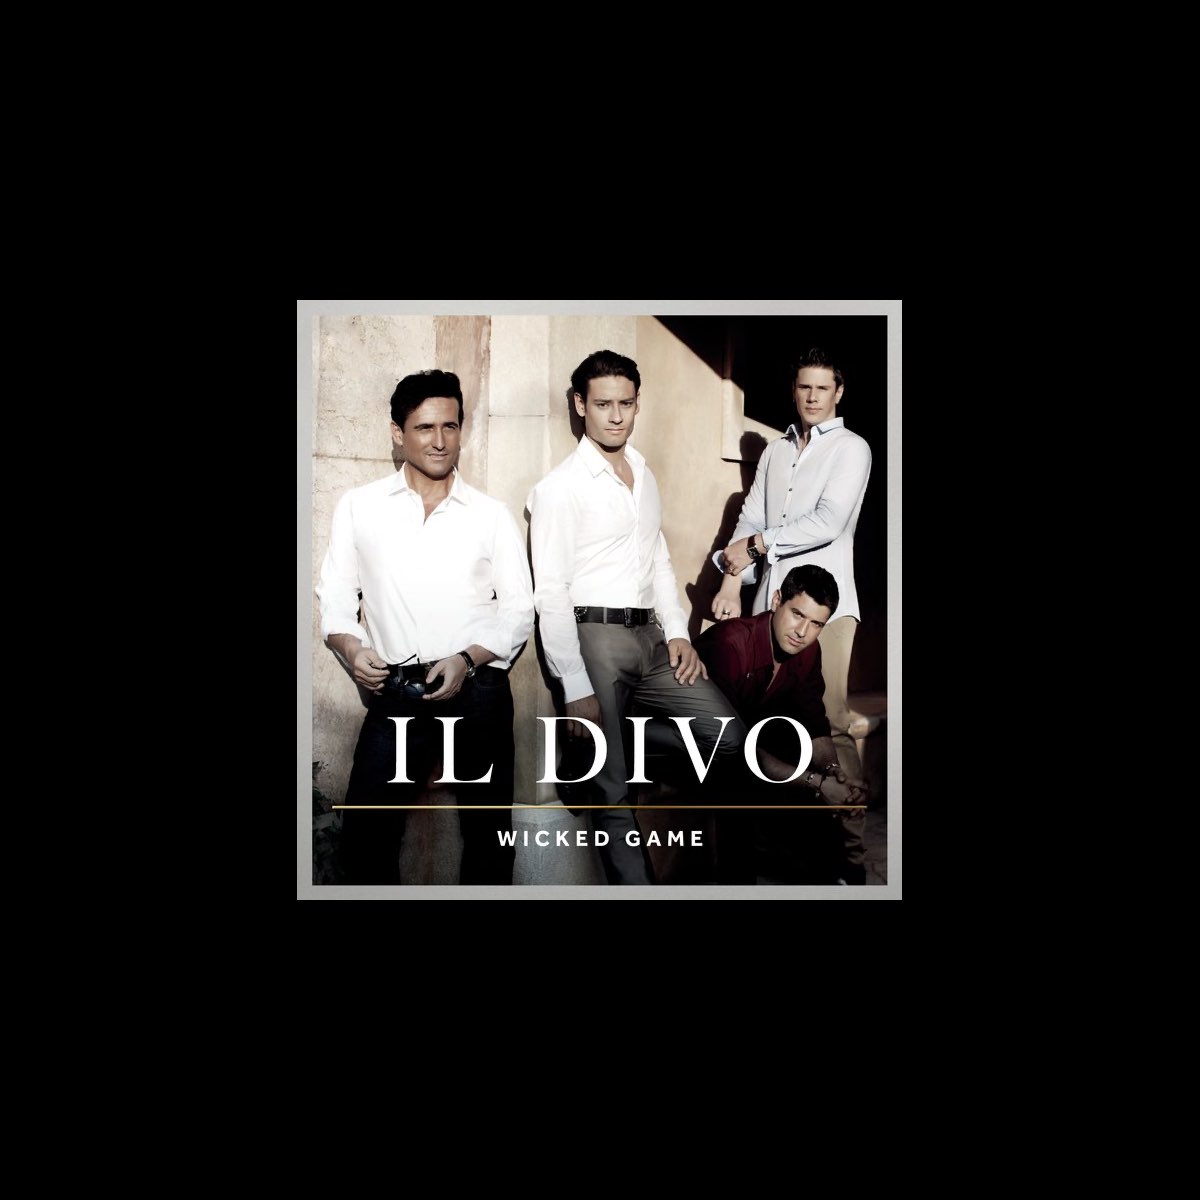 Wicked Game by Il Divo on Apple Music